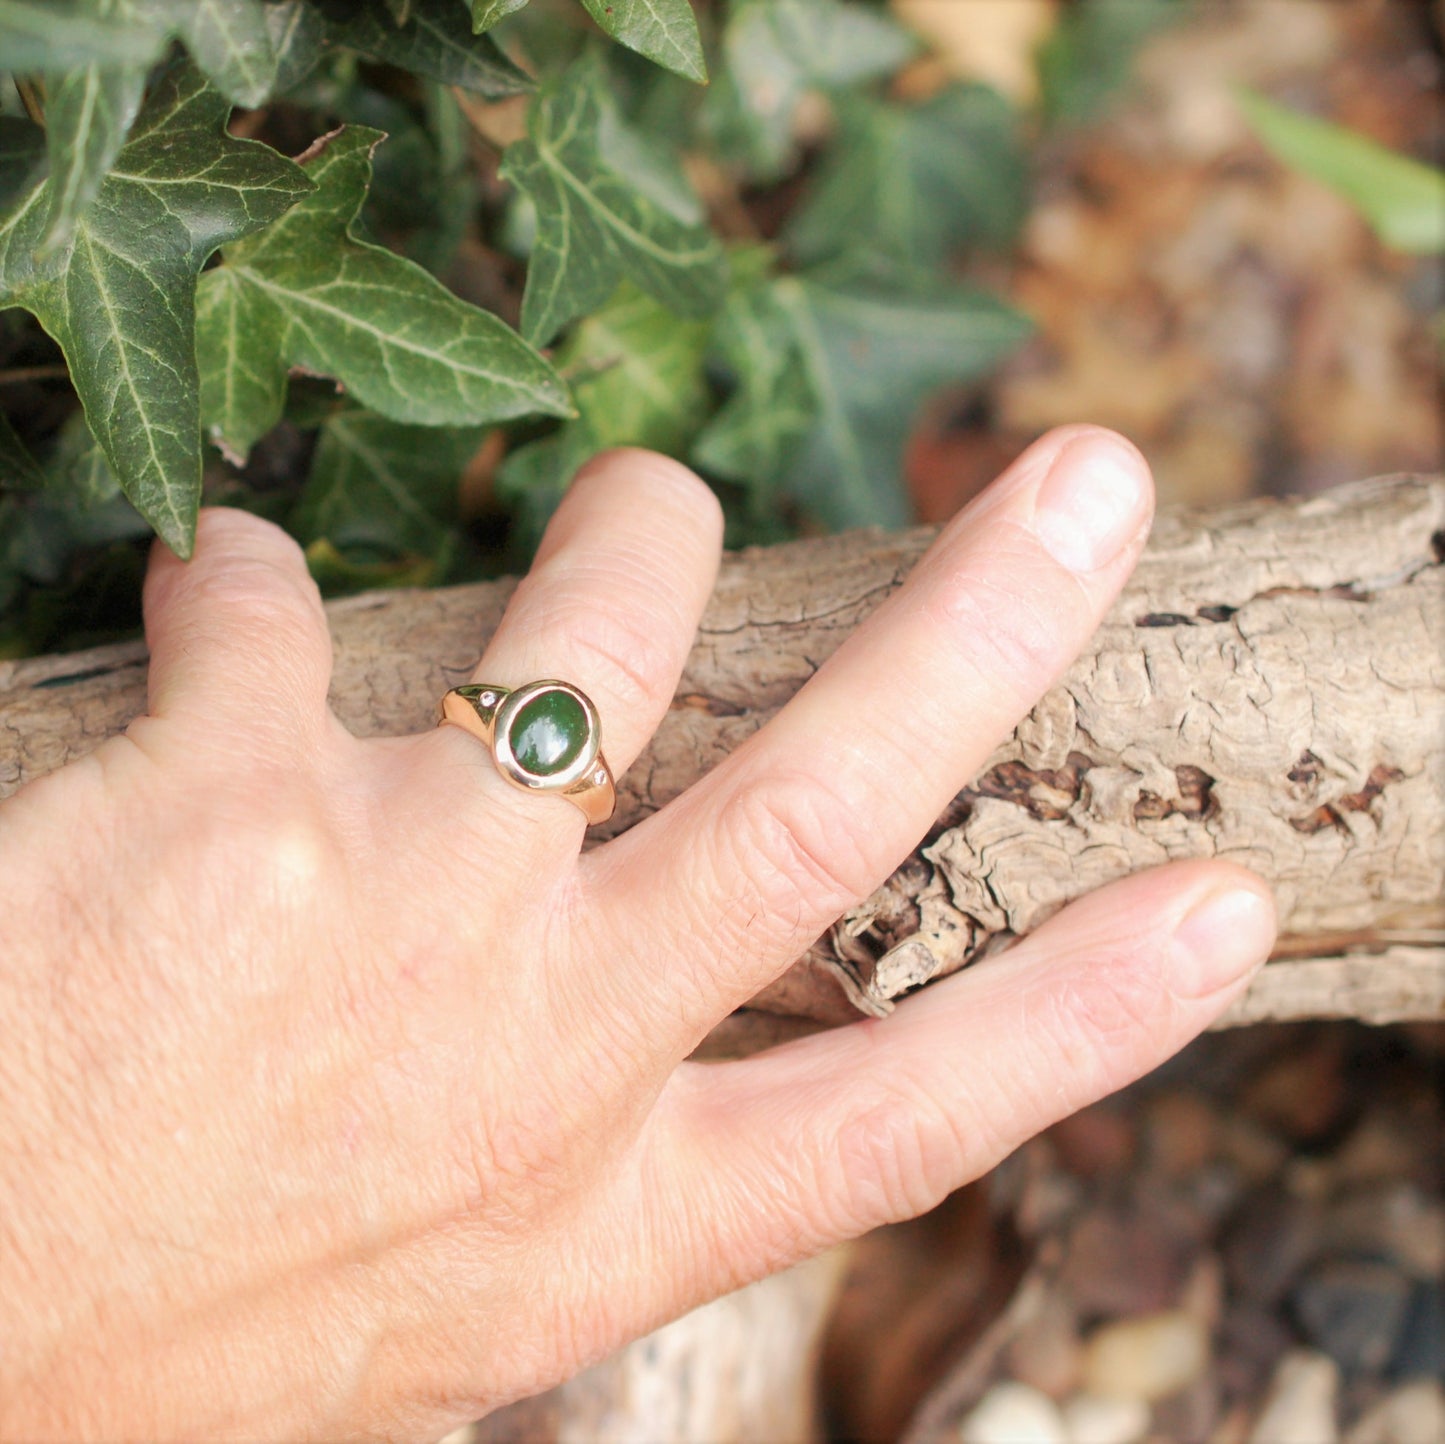 Jade, diamond and gold, Gentleman's or Lady's ring. Handmade in England with London Hallmarks. UK N ½ or US 7. *This piece is ready to be shipped*